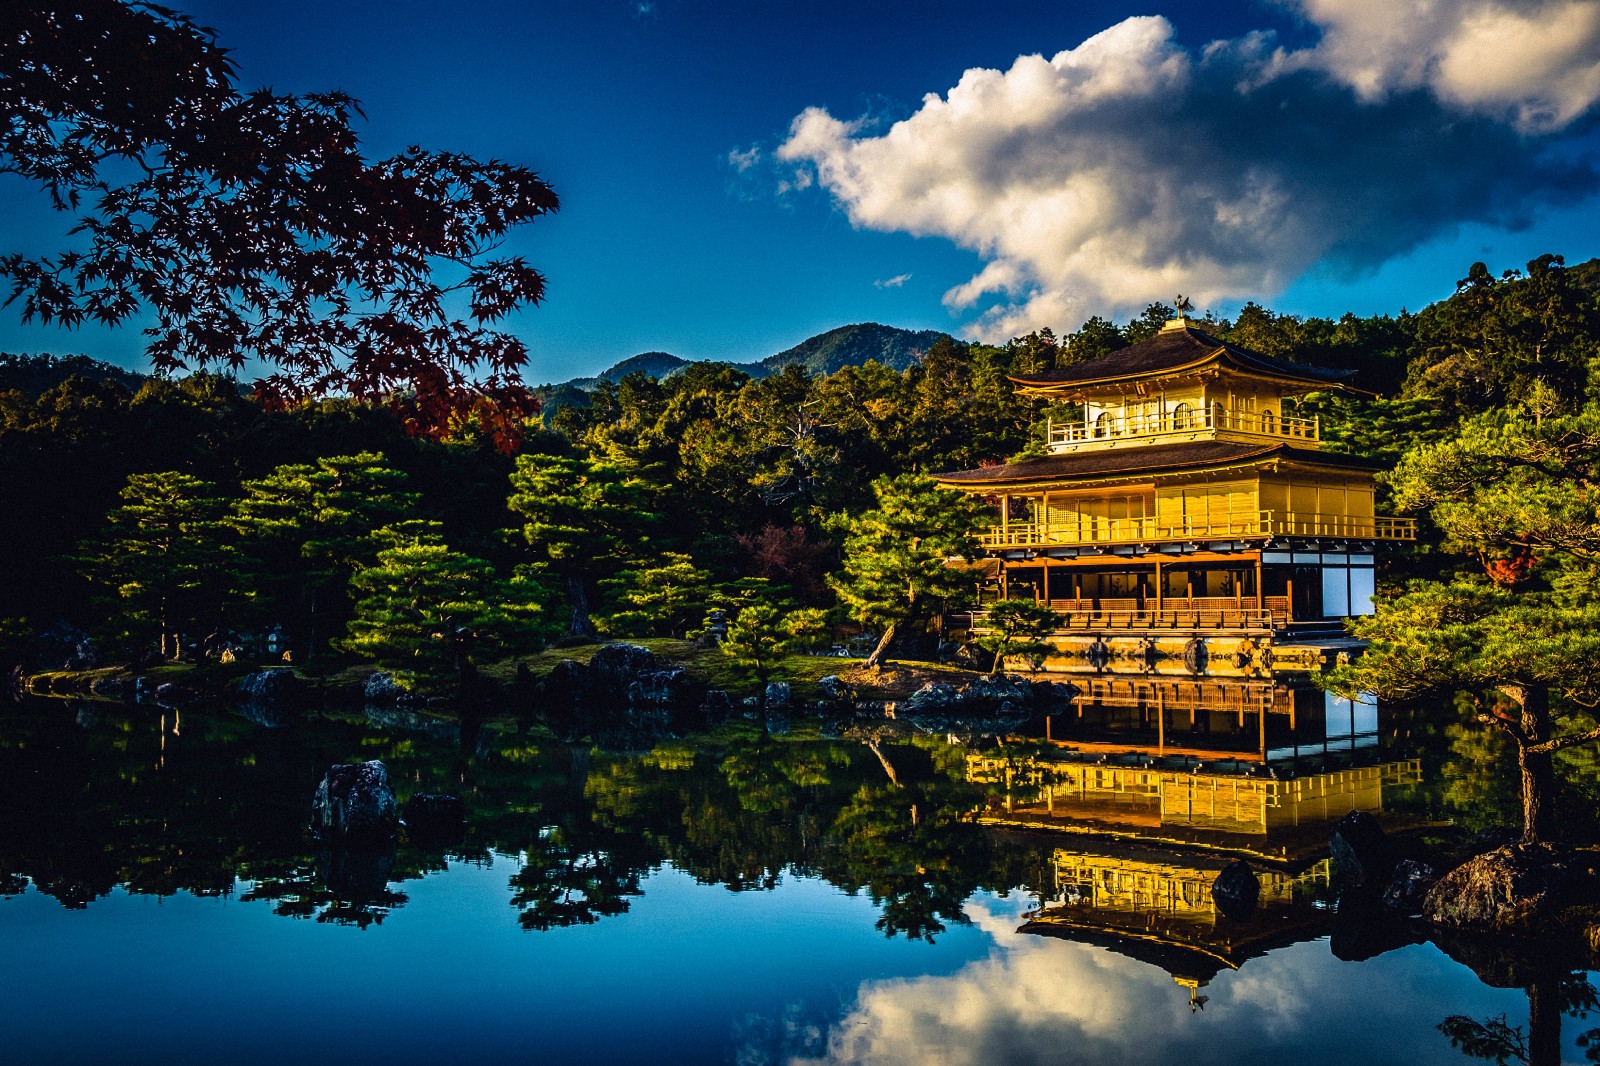 25 Top Things to Do in Kyoto : Kyoto Bucket List 2019 - Japan Web Magazine